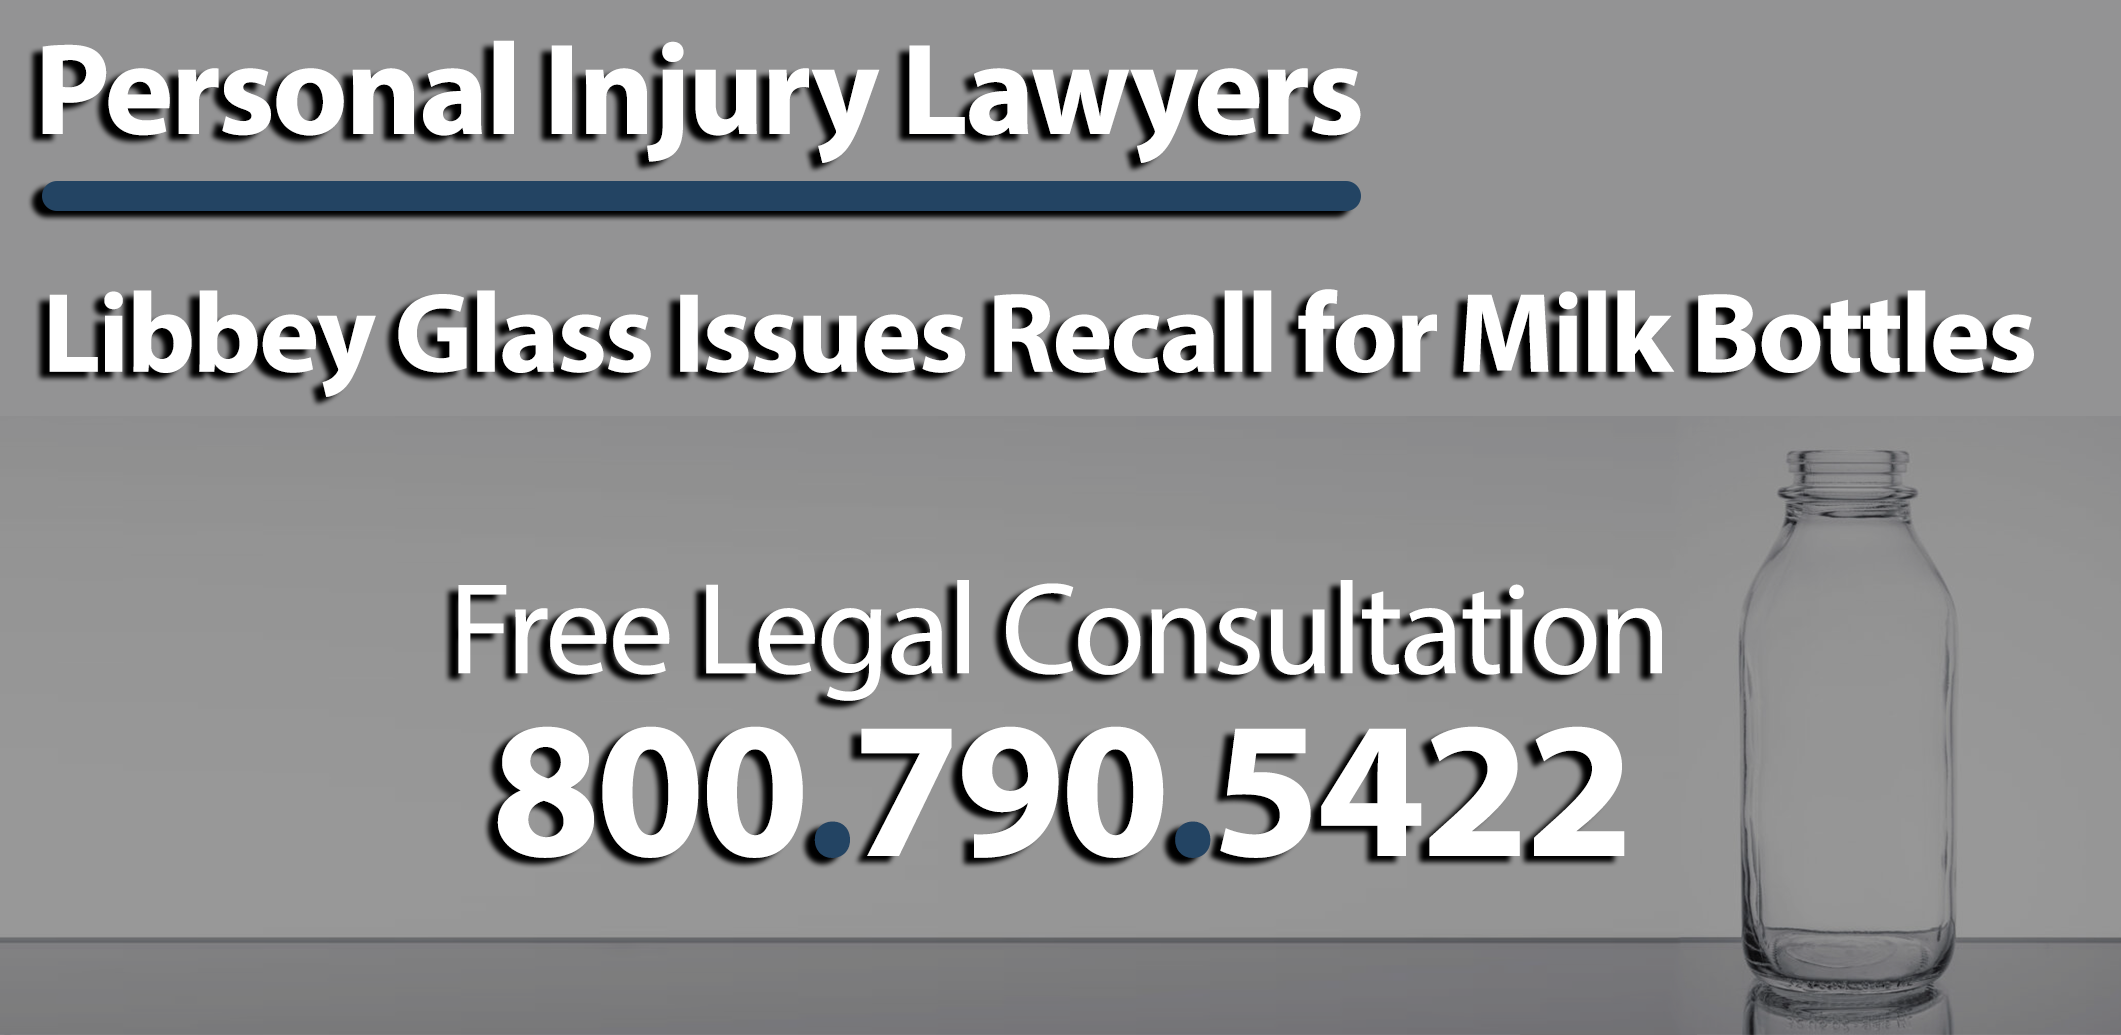 libbey glasss milk bottle recall laceration risk personal injury lawyer sue maximum compensation